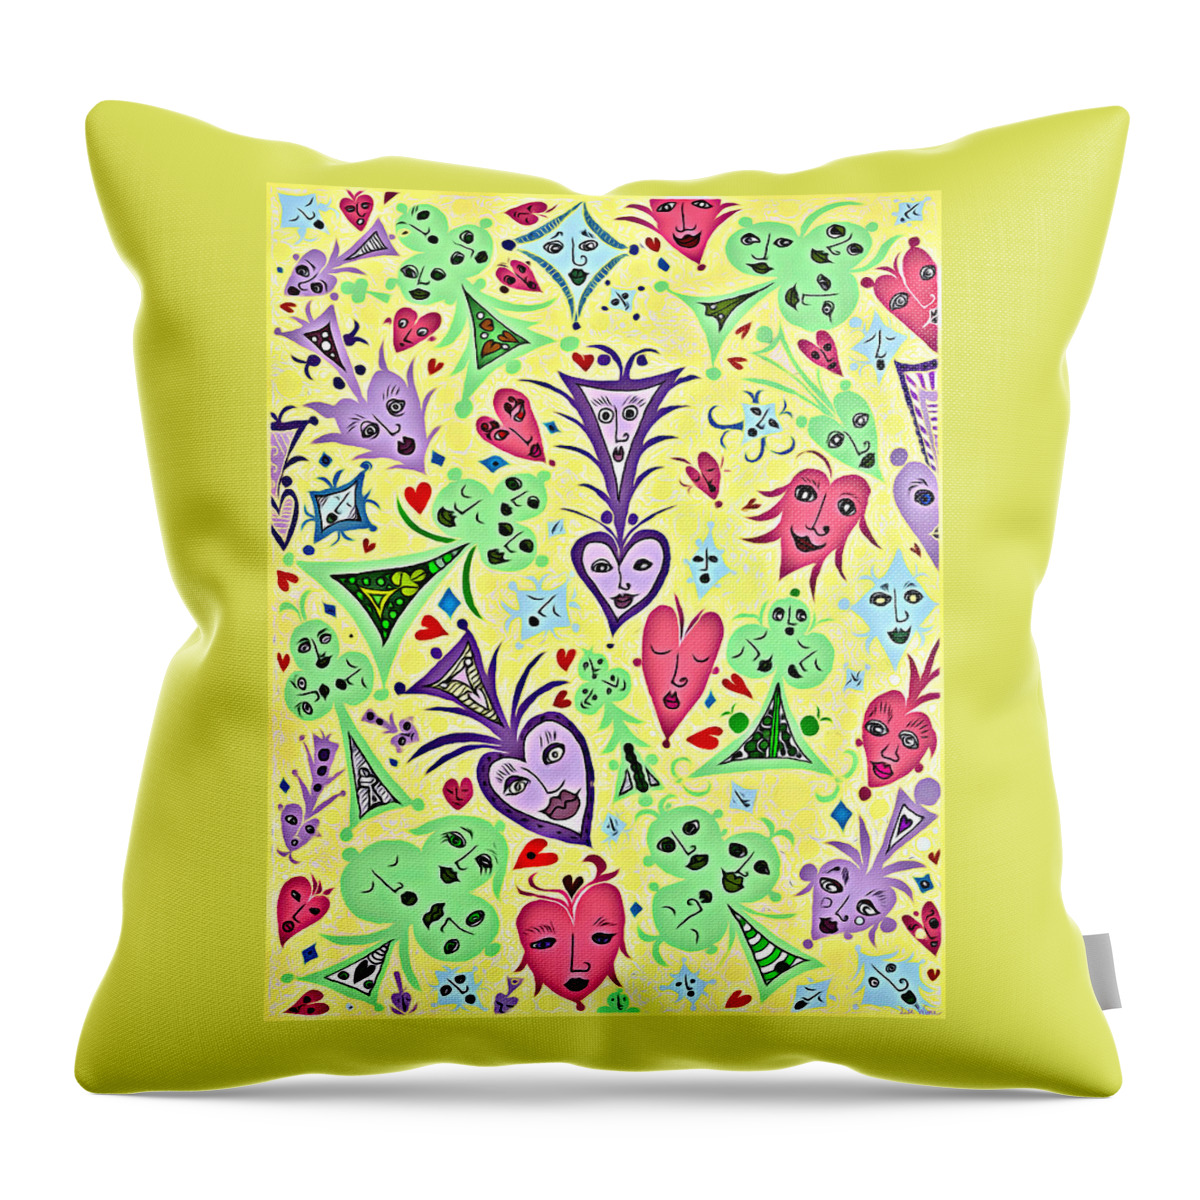 Lise Winne Throw Pillow featuring the digital art Card Game Symbols with Faces in Yellow by Lise Winne